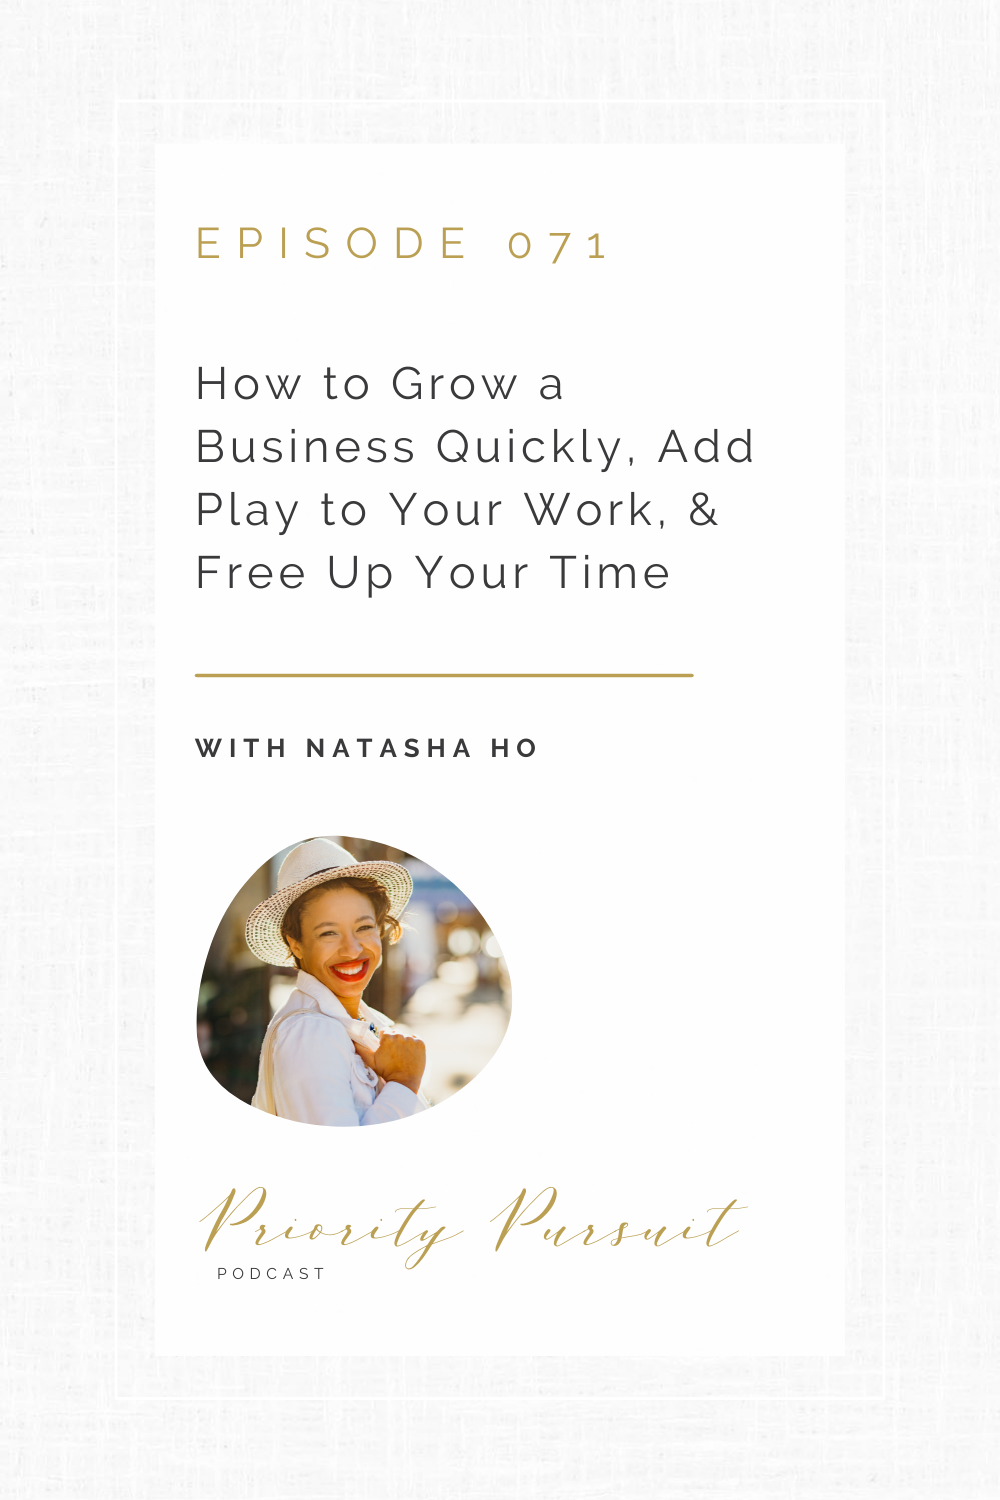 Victoria Rayburn and Natasha Ho discuss how to grow a small business quickly that supports the life you want to live.